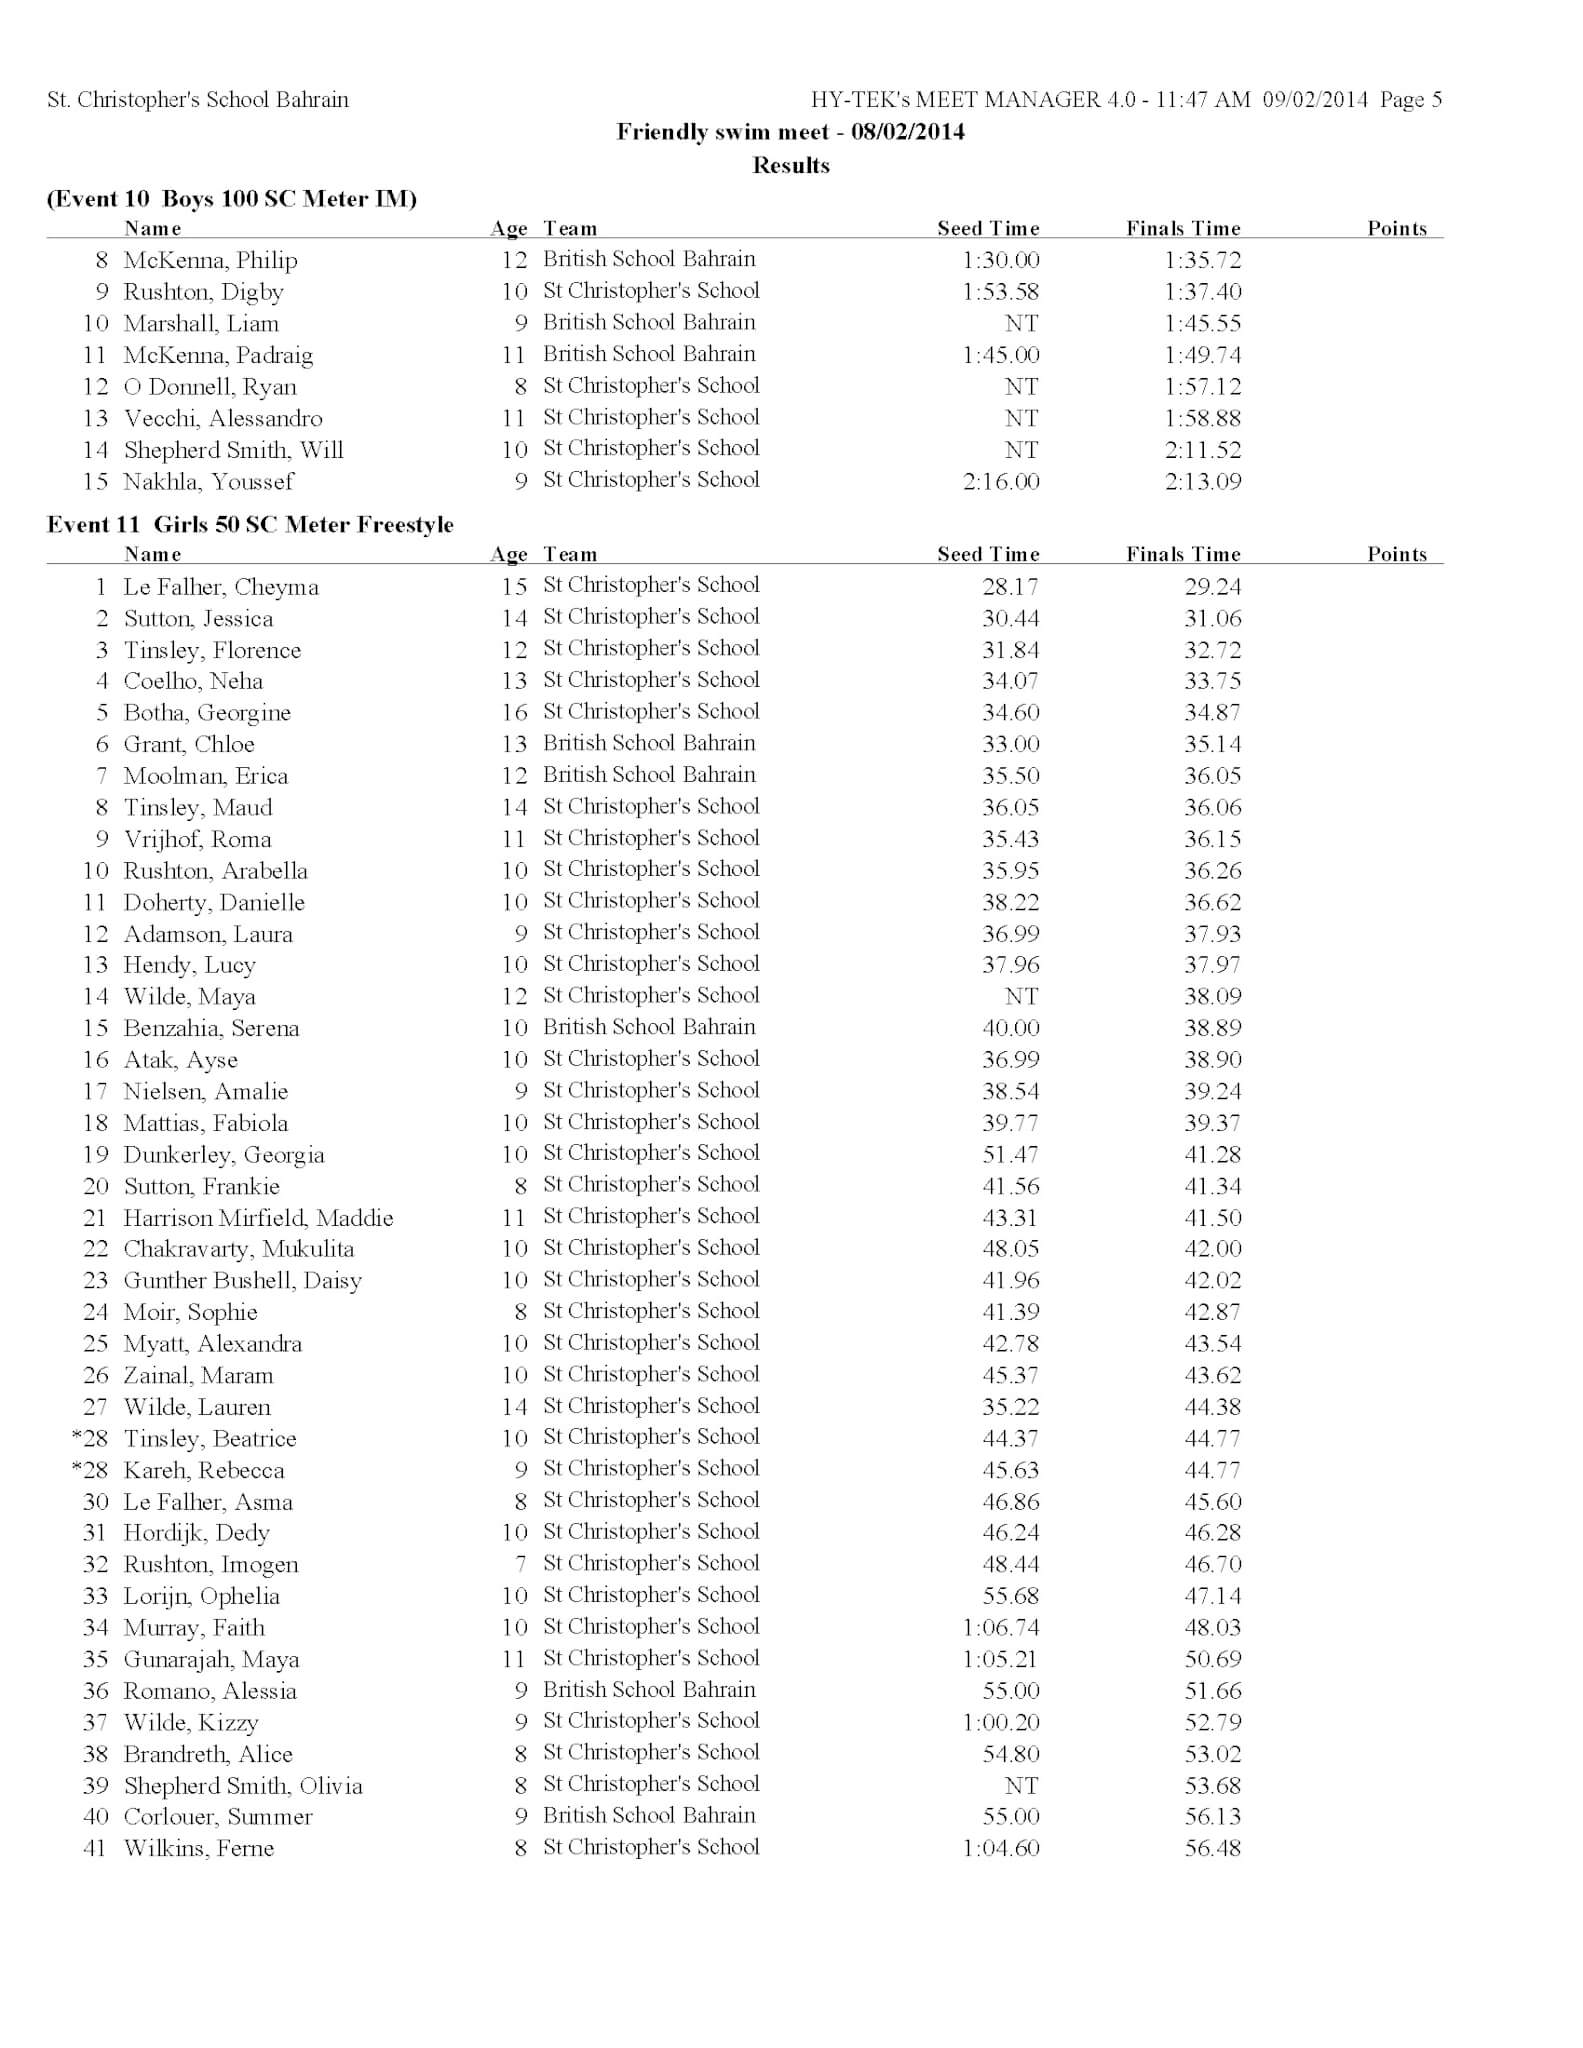 full results1_Page_5